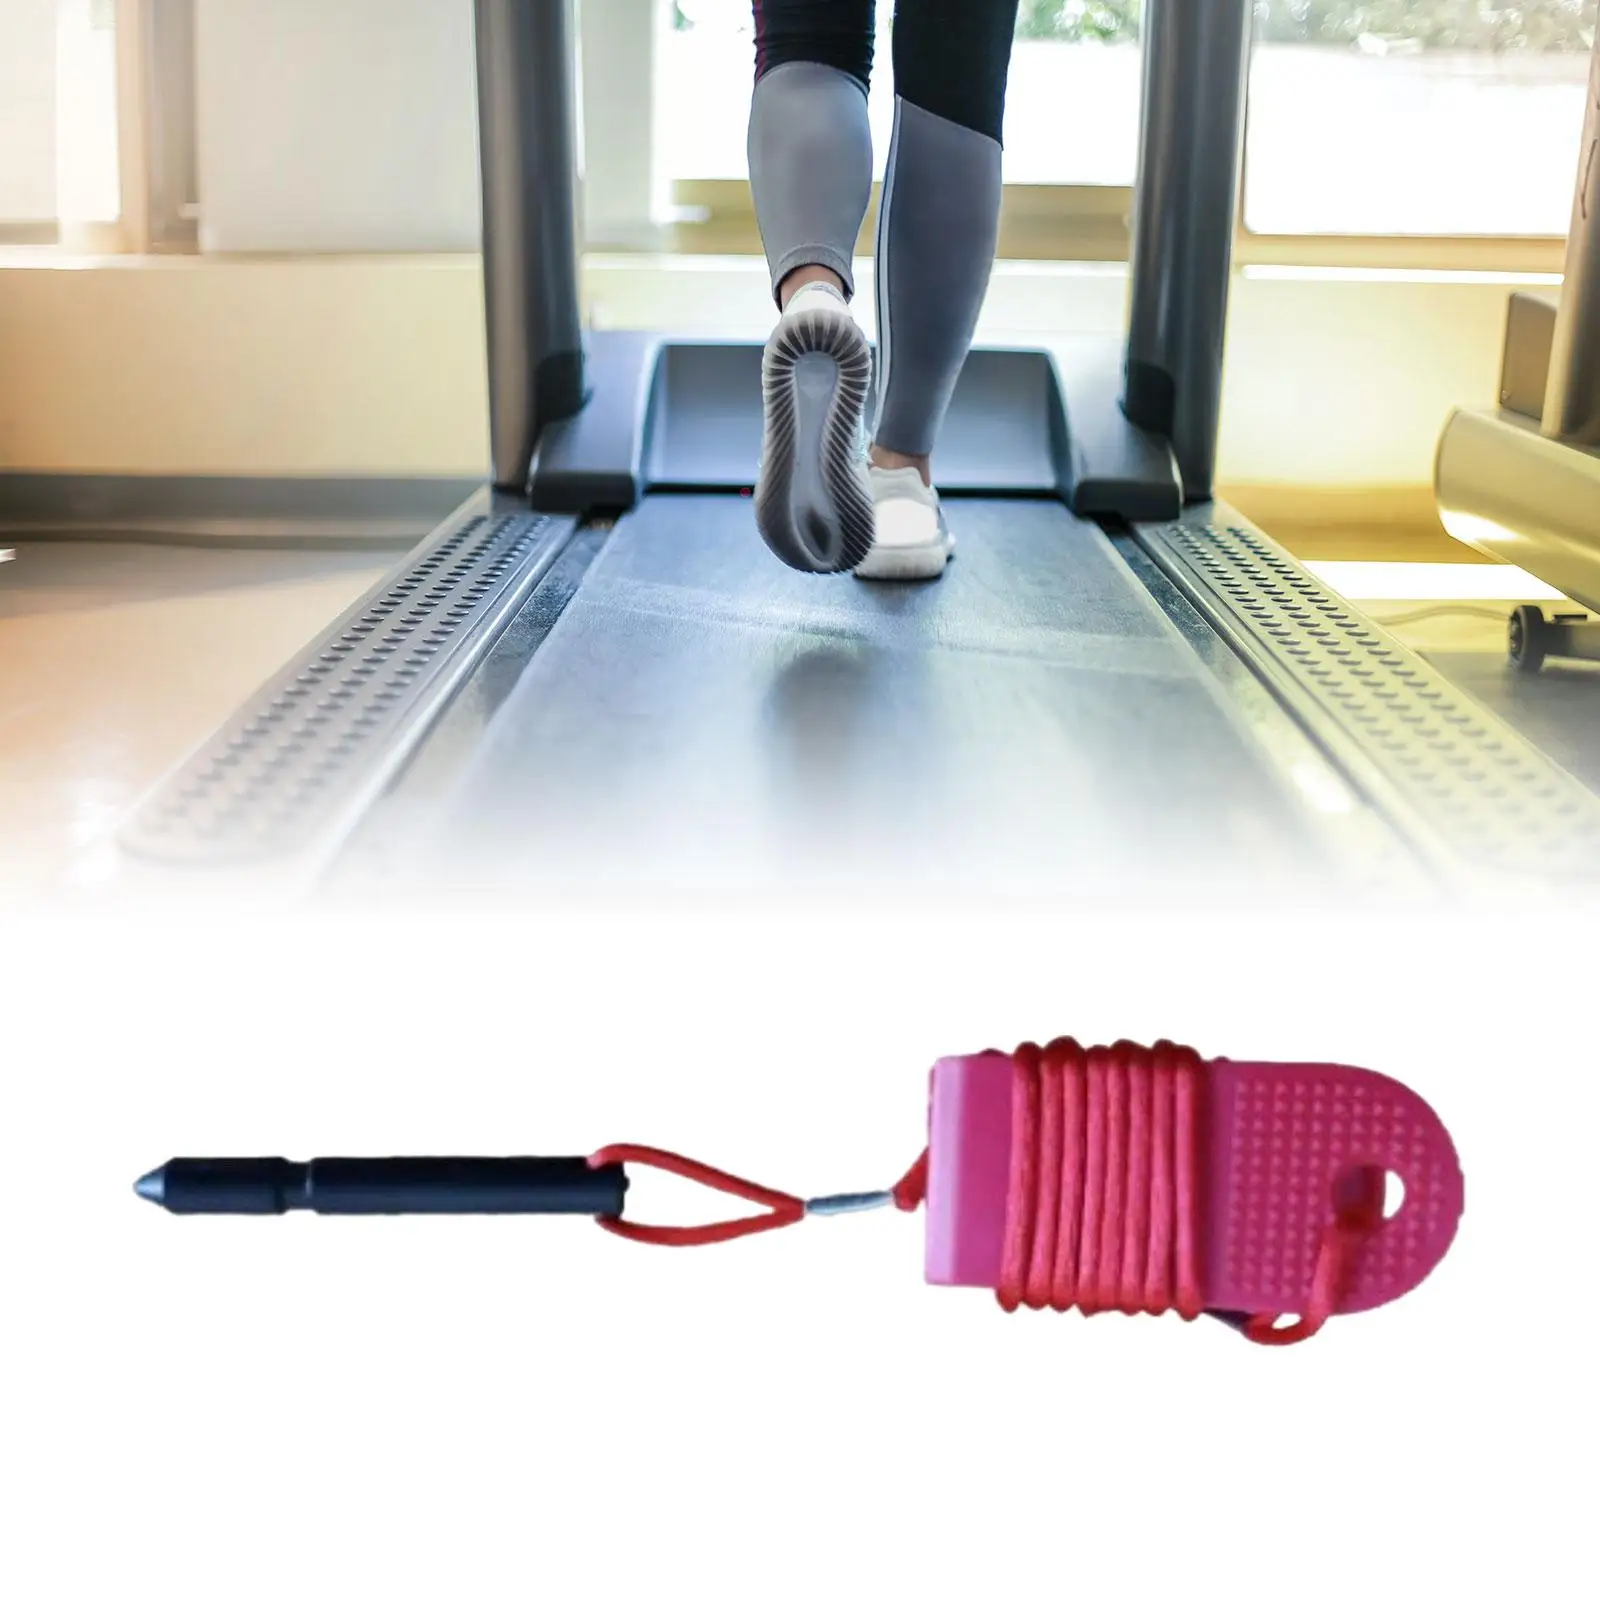 Treadmill Safety Key Clip Emergency Stop Treadmill Safety Lock Universal for Home Gym, Fitness Equipment